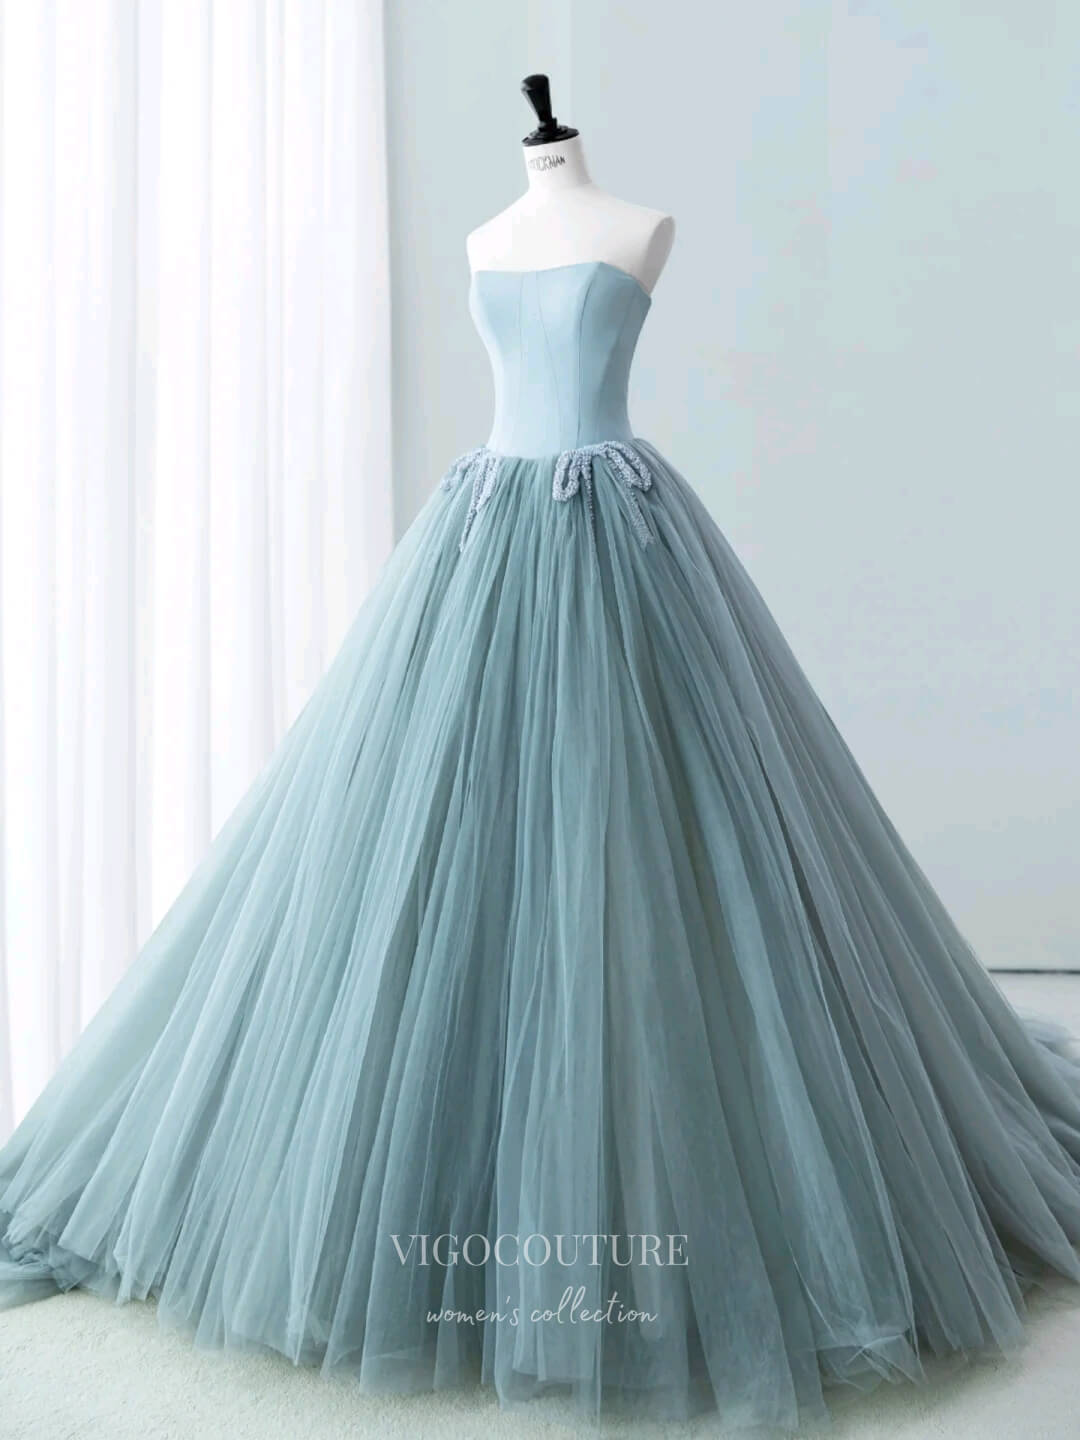 Gorgeous Dusty Blue Strapless Prom Ball Gown with Satin Bodice and Tulle Bottom 22276-Prom Dresses-vigocouture-Dusty Blue-Custom Size-vigocouture